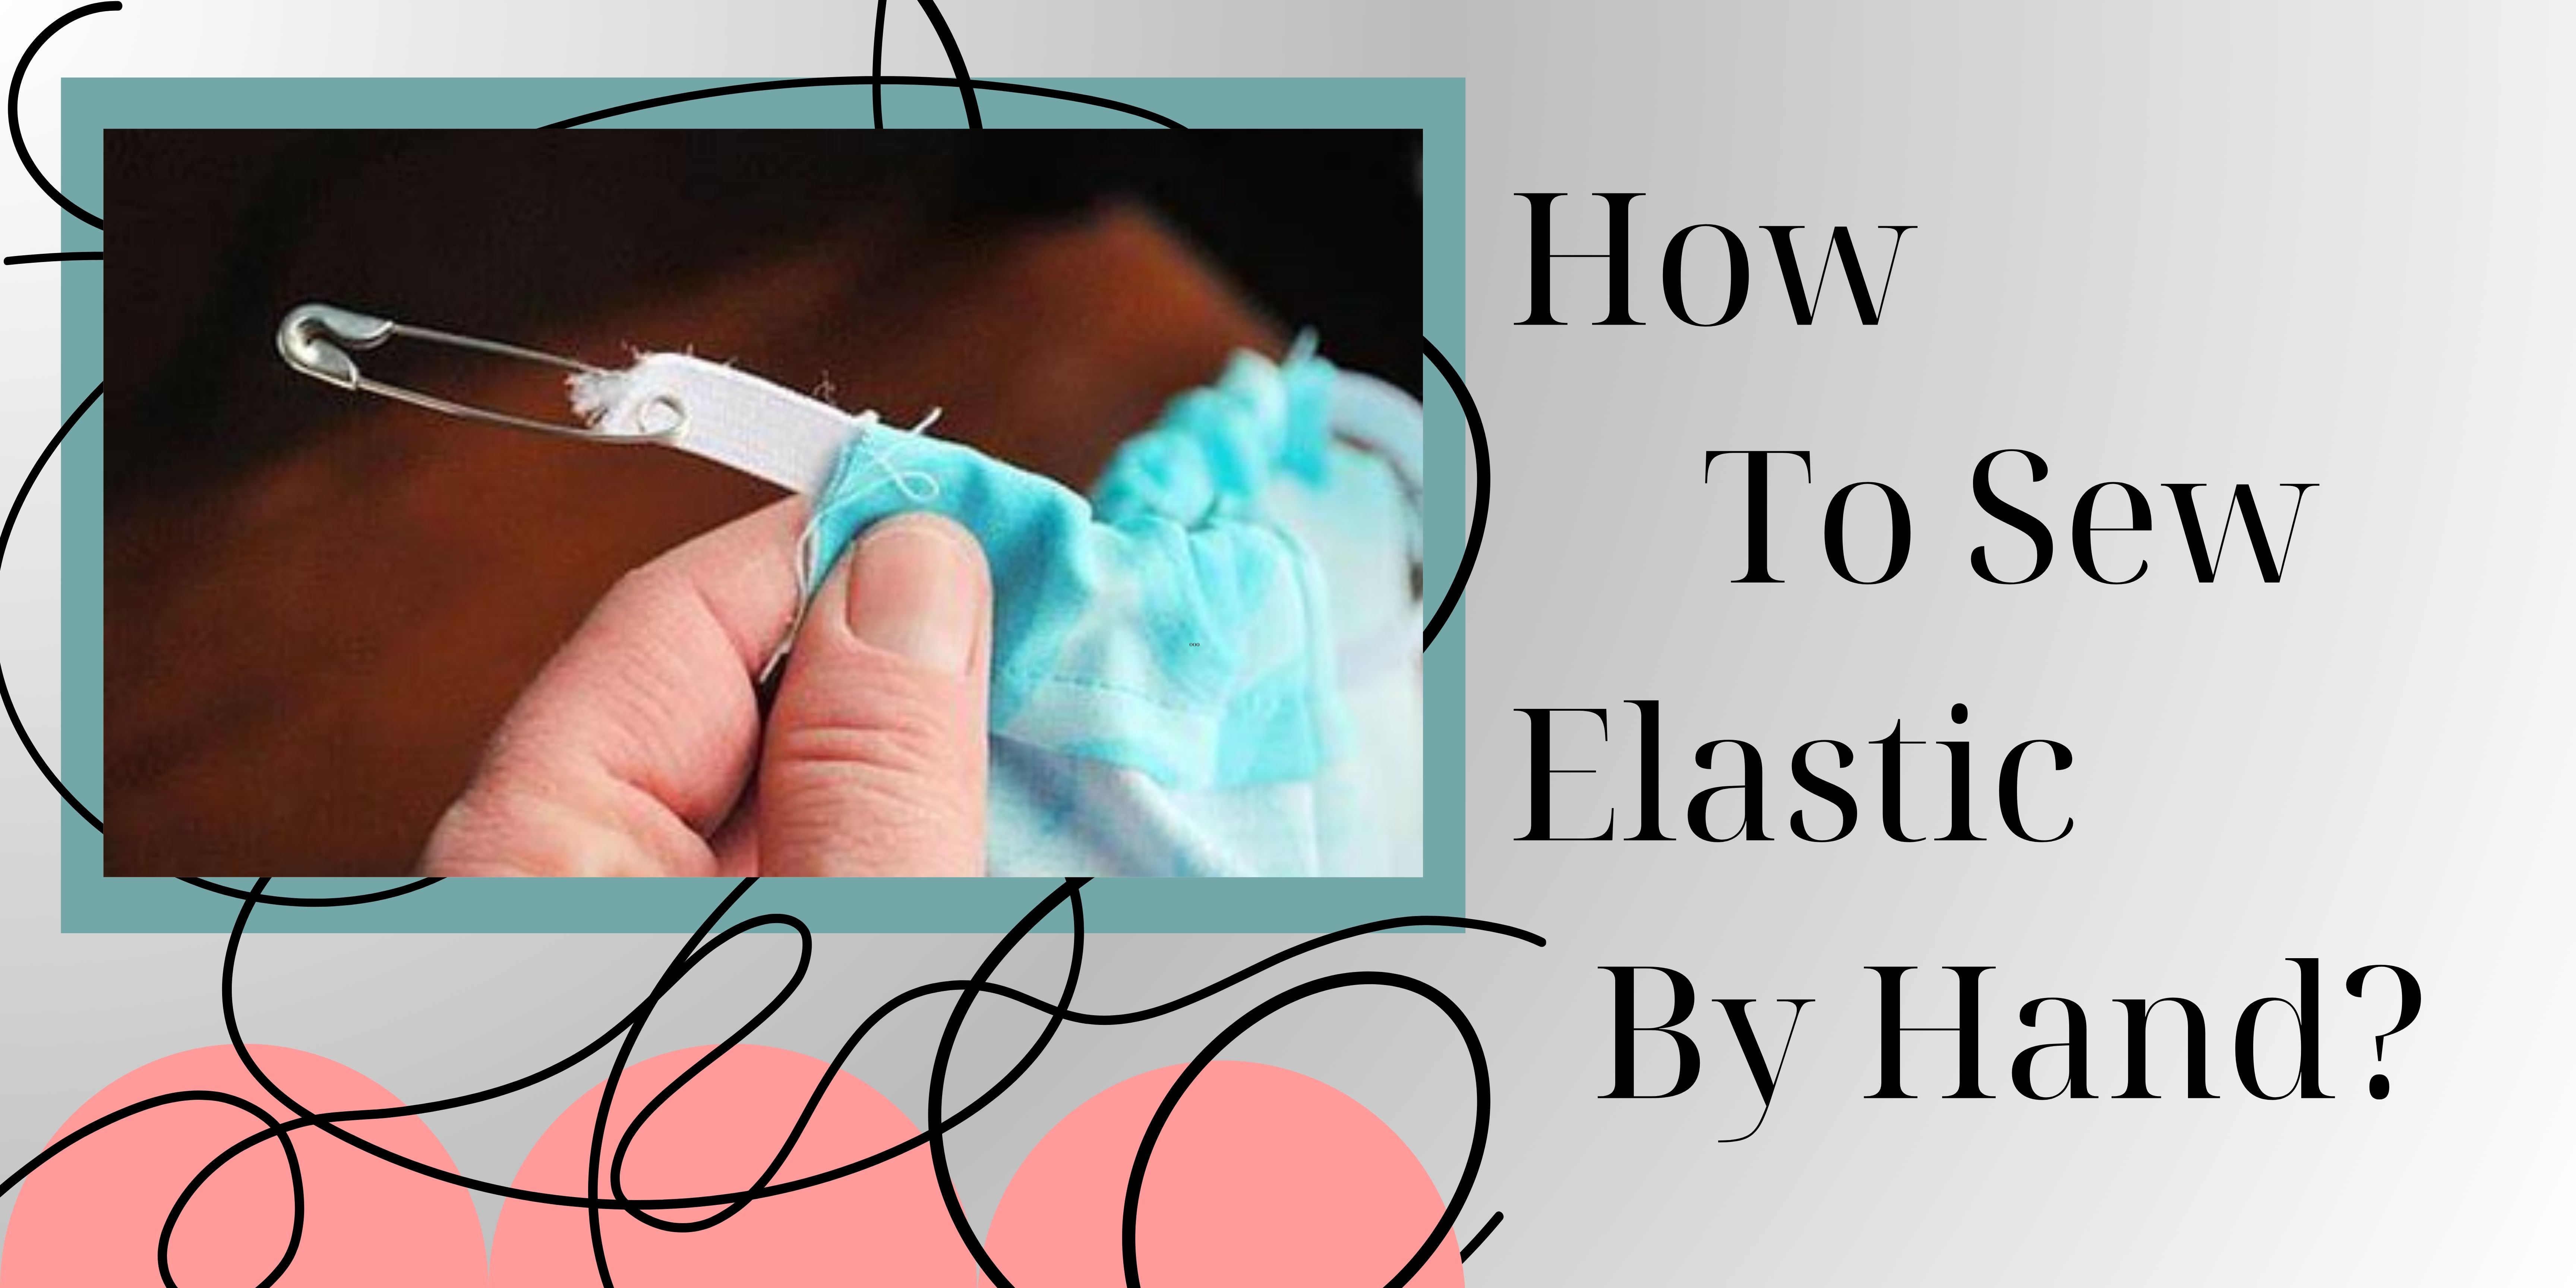 How To Sew Elastic By Hand?